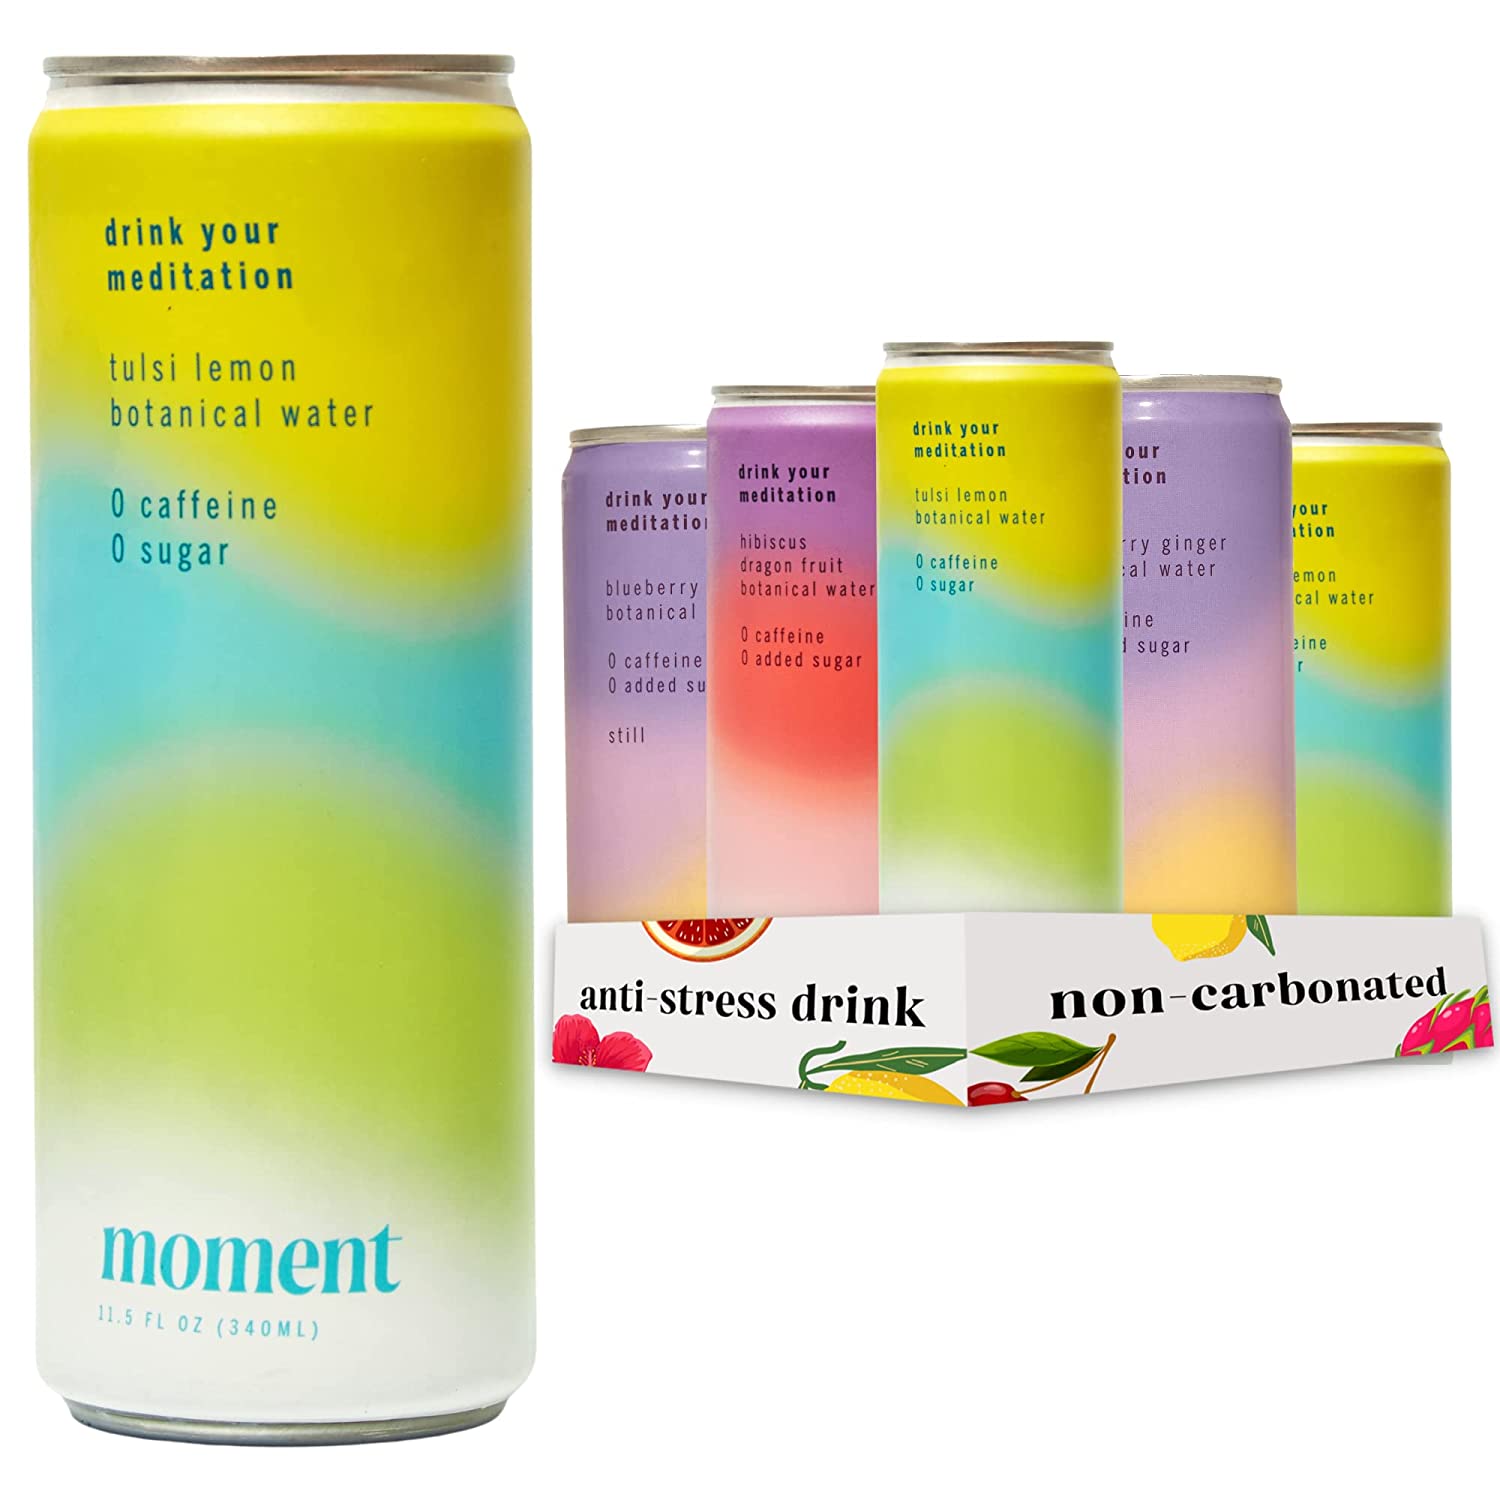 Moment Botanical Water STILL - Variety Pack Healthy & Natural with adaptogens and nootropics. L-Theanine and Ashwagandha for Zen & Stress Relief. No Caffeine or Added Sugar. Keto.